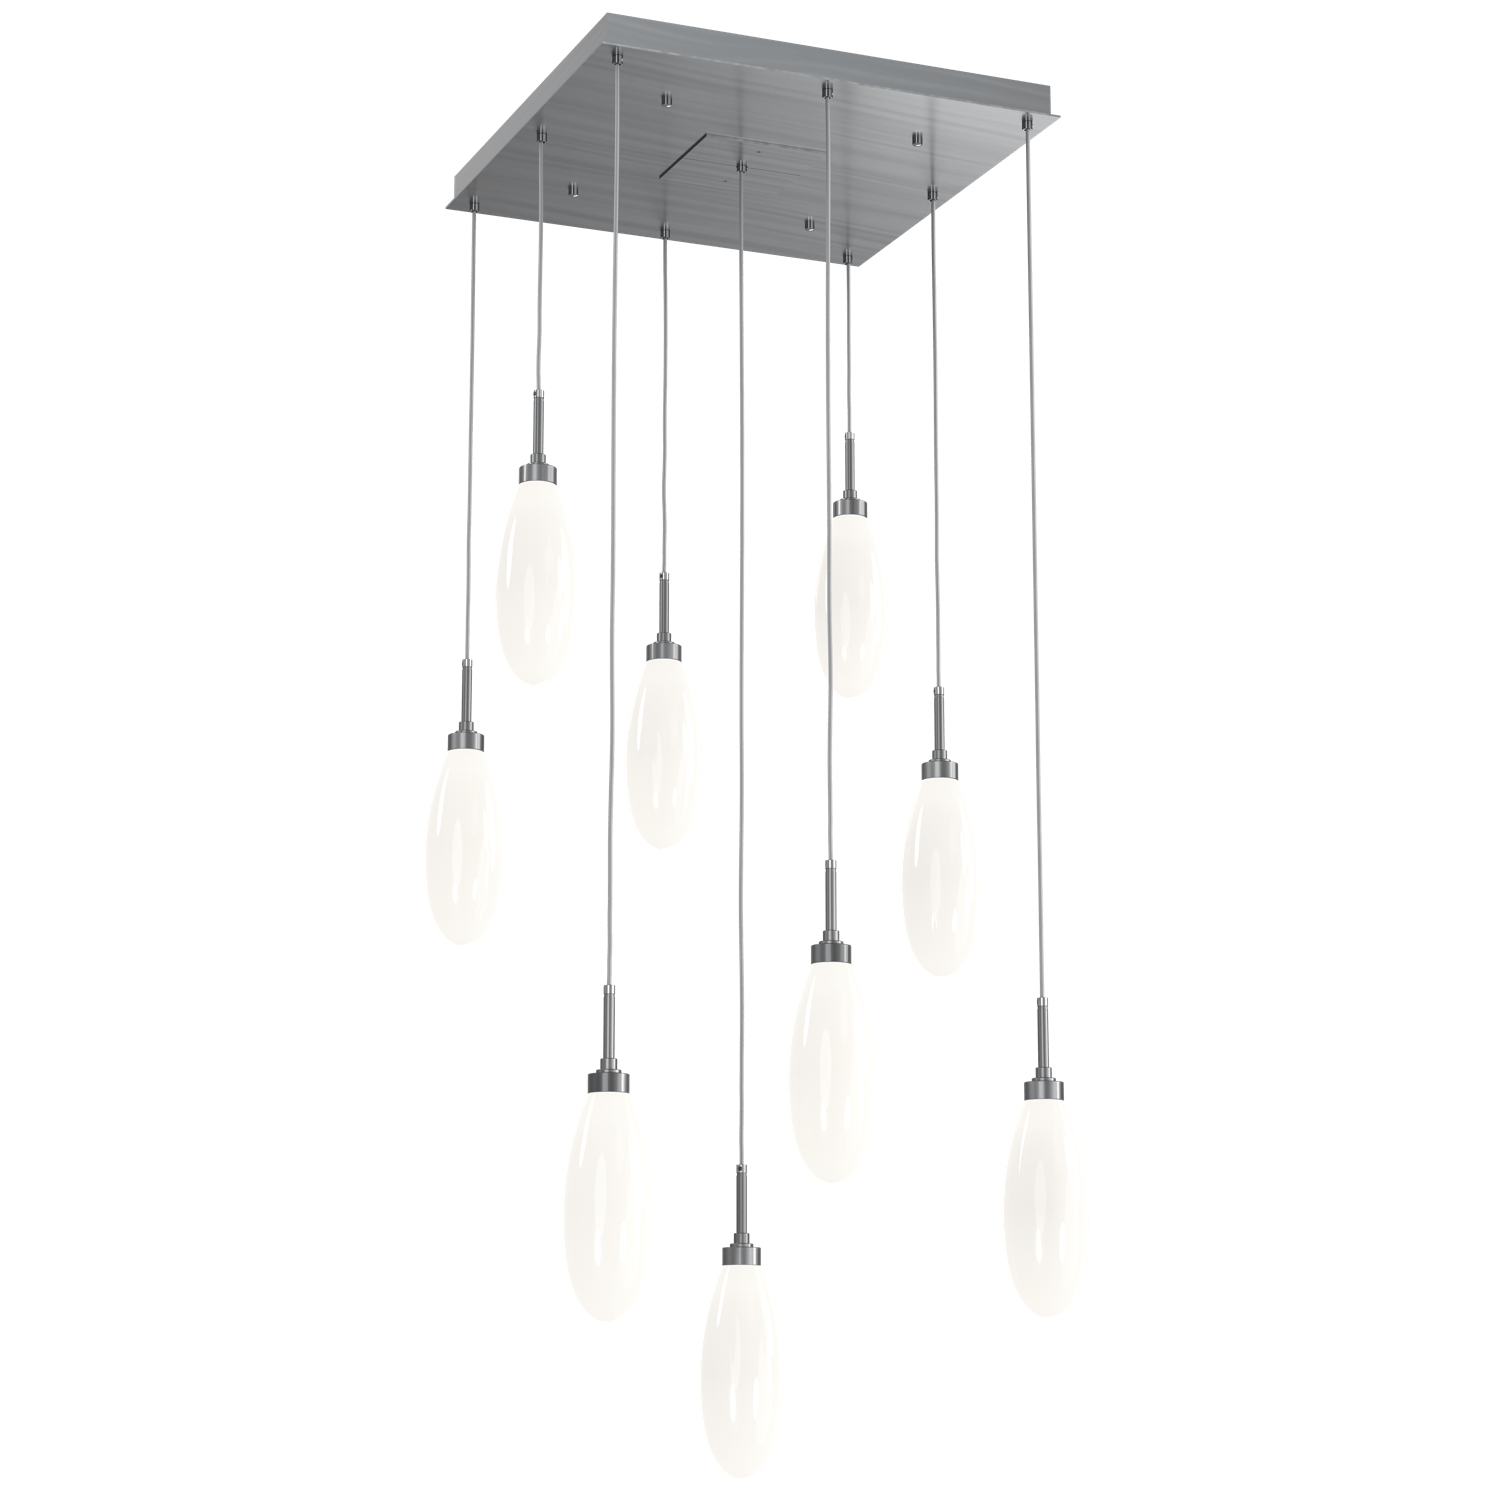 CHB0071-09-GM-WL-LL-Hammerton-Studio-Fiori-9-light-square-pendant-chandelier-with-gunmetal-finish-and-opal-white-glass-shades-and-LED-lamping